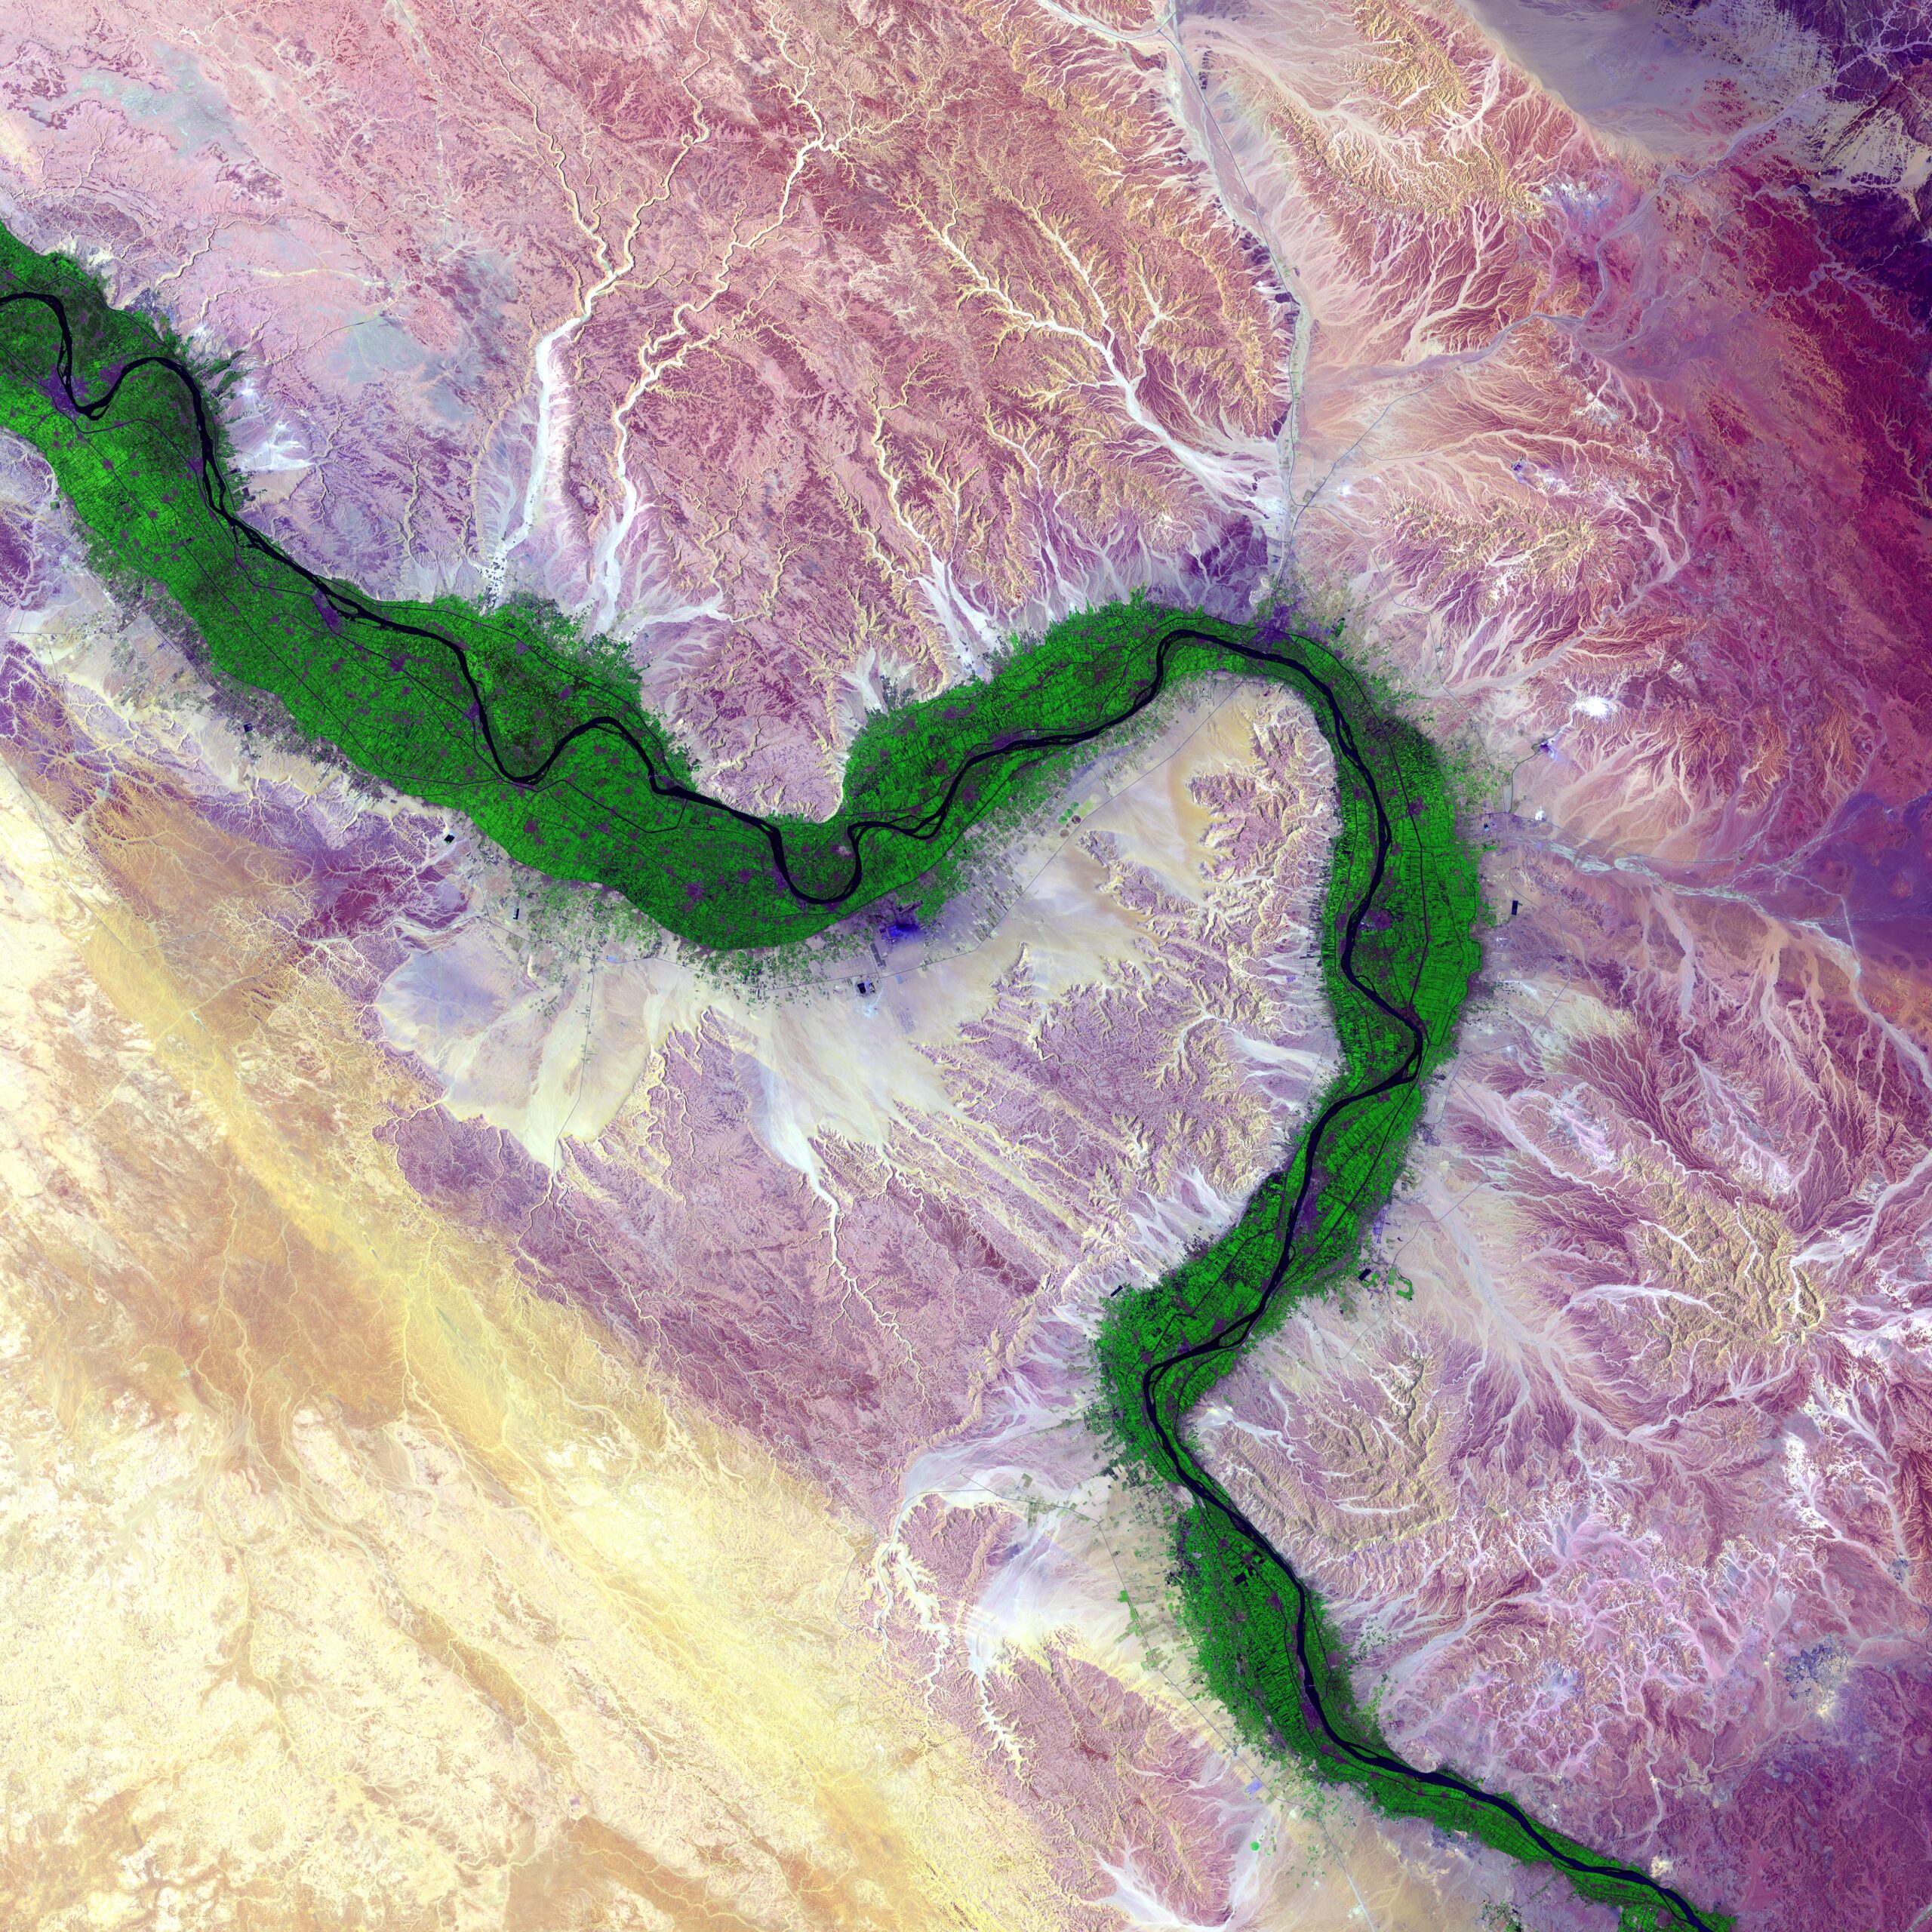 Green farmland marks a distinct boundary between the Nile floodplain and the surrounding desert, seen as brown, yellow, and purple from satellite imagery.